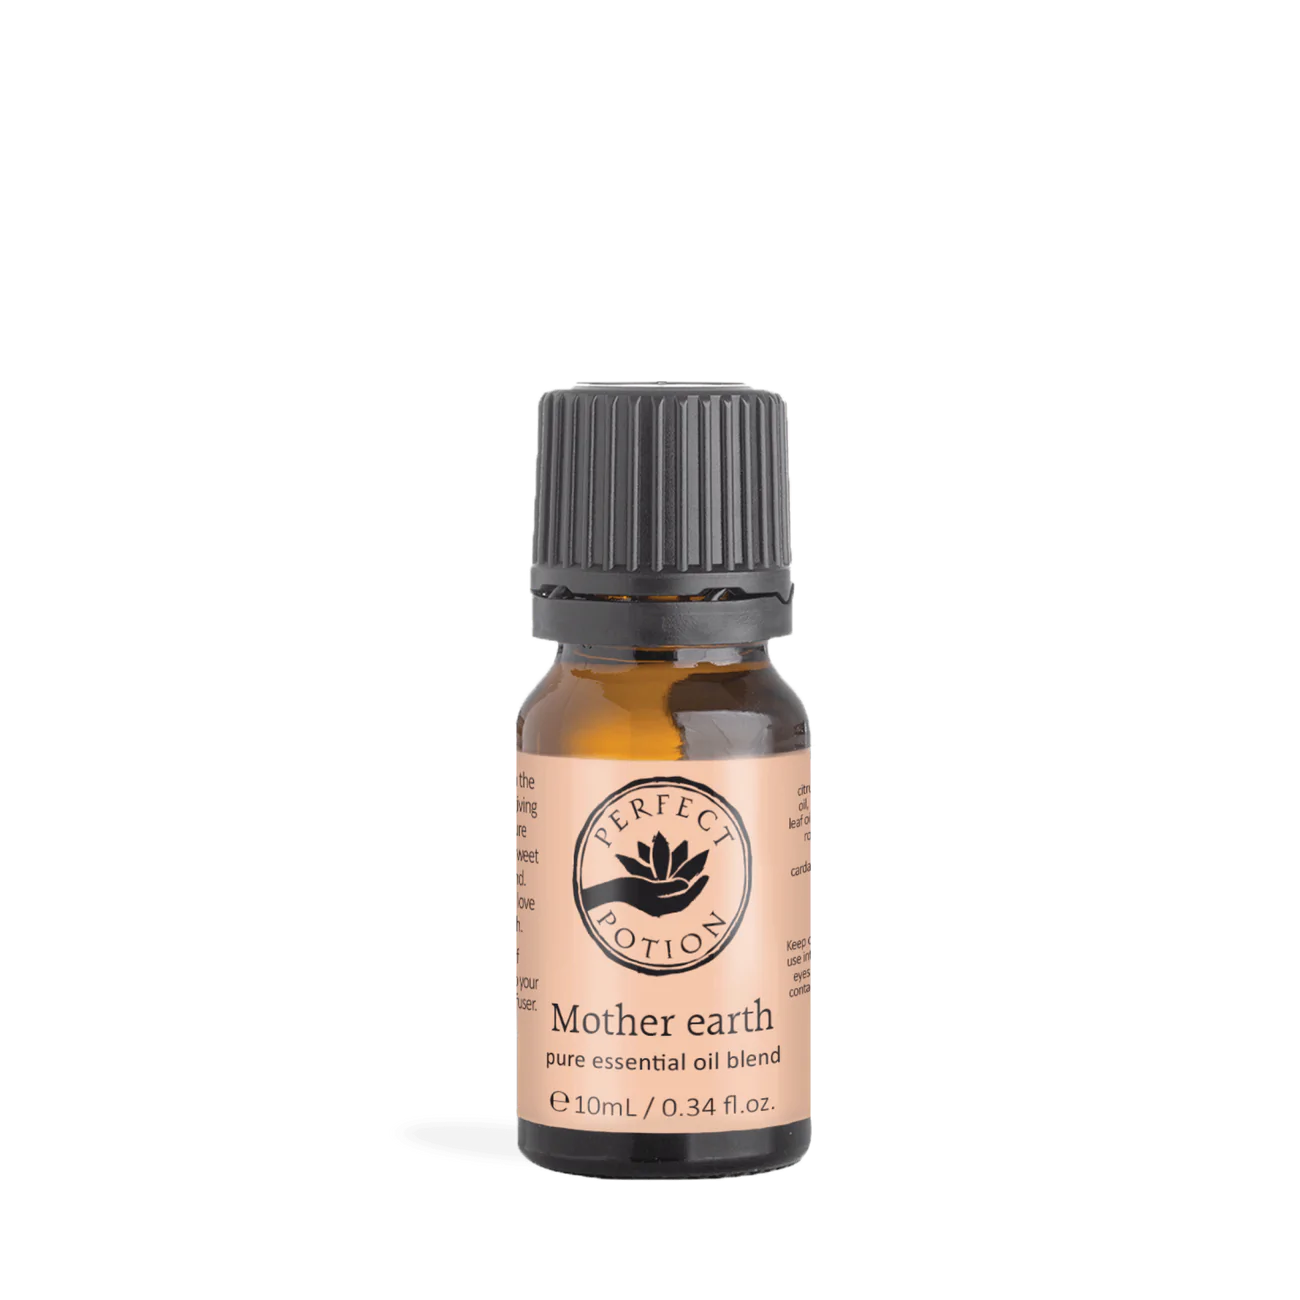 Perfect Potion Mother Earth Oil Blend